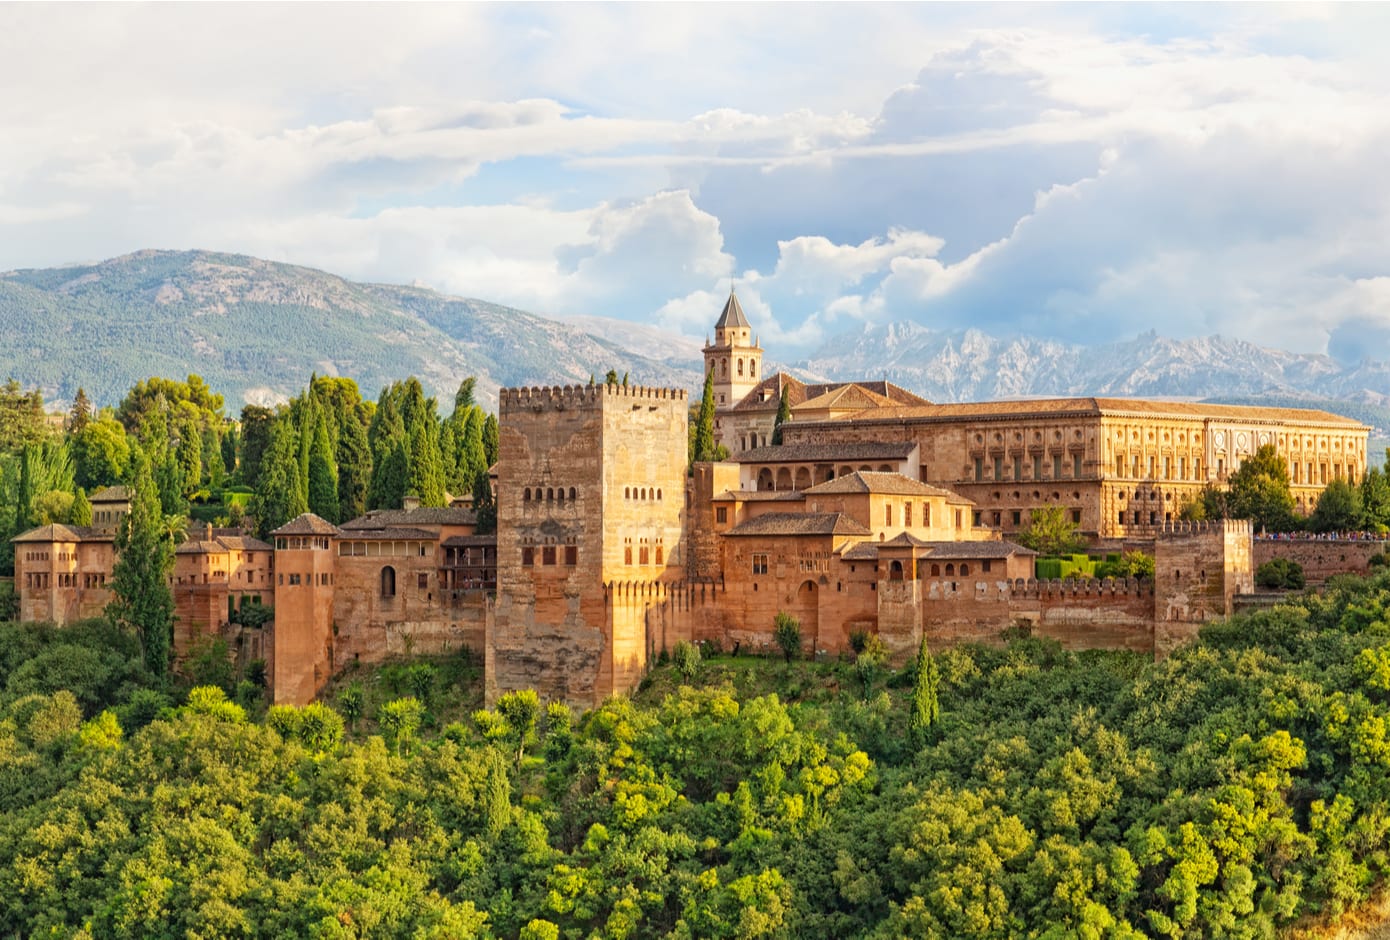 The ancient Alhambra fortress surrounded by a forest in Granada, Spain.